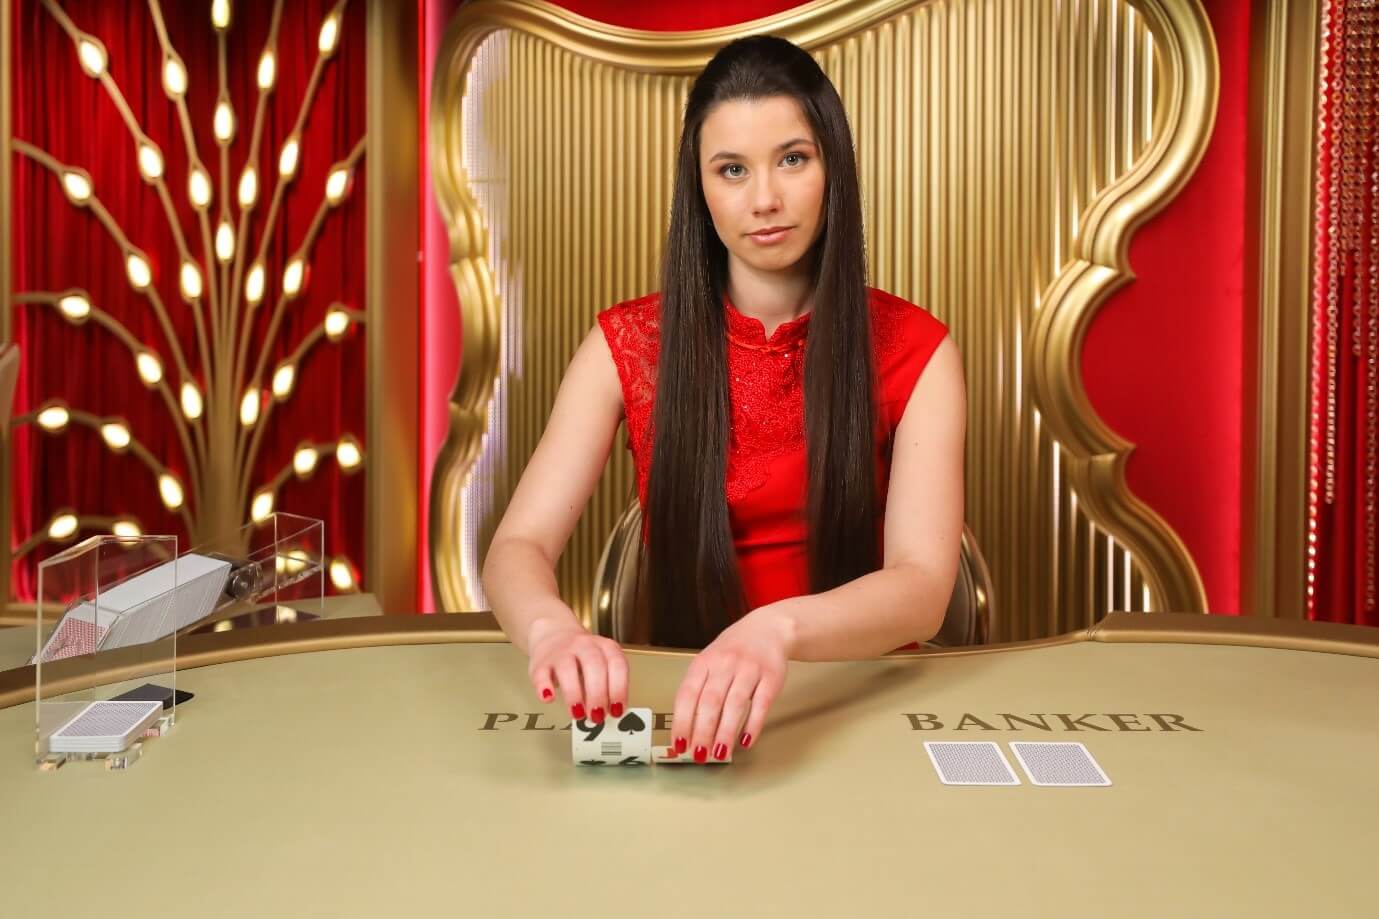 An Evolution Gaming dealer squeezing cards at a Live Baccarat table